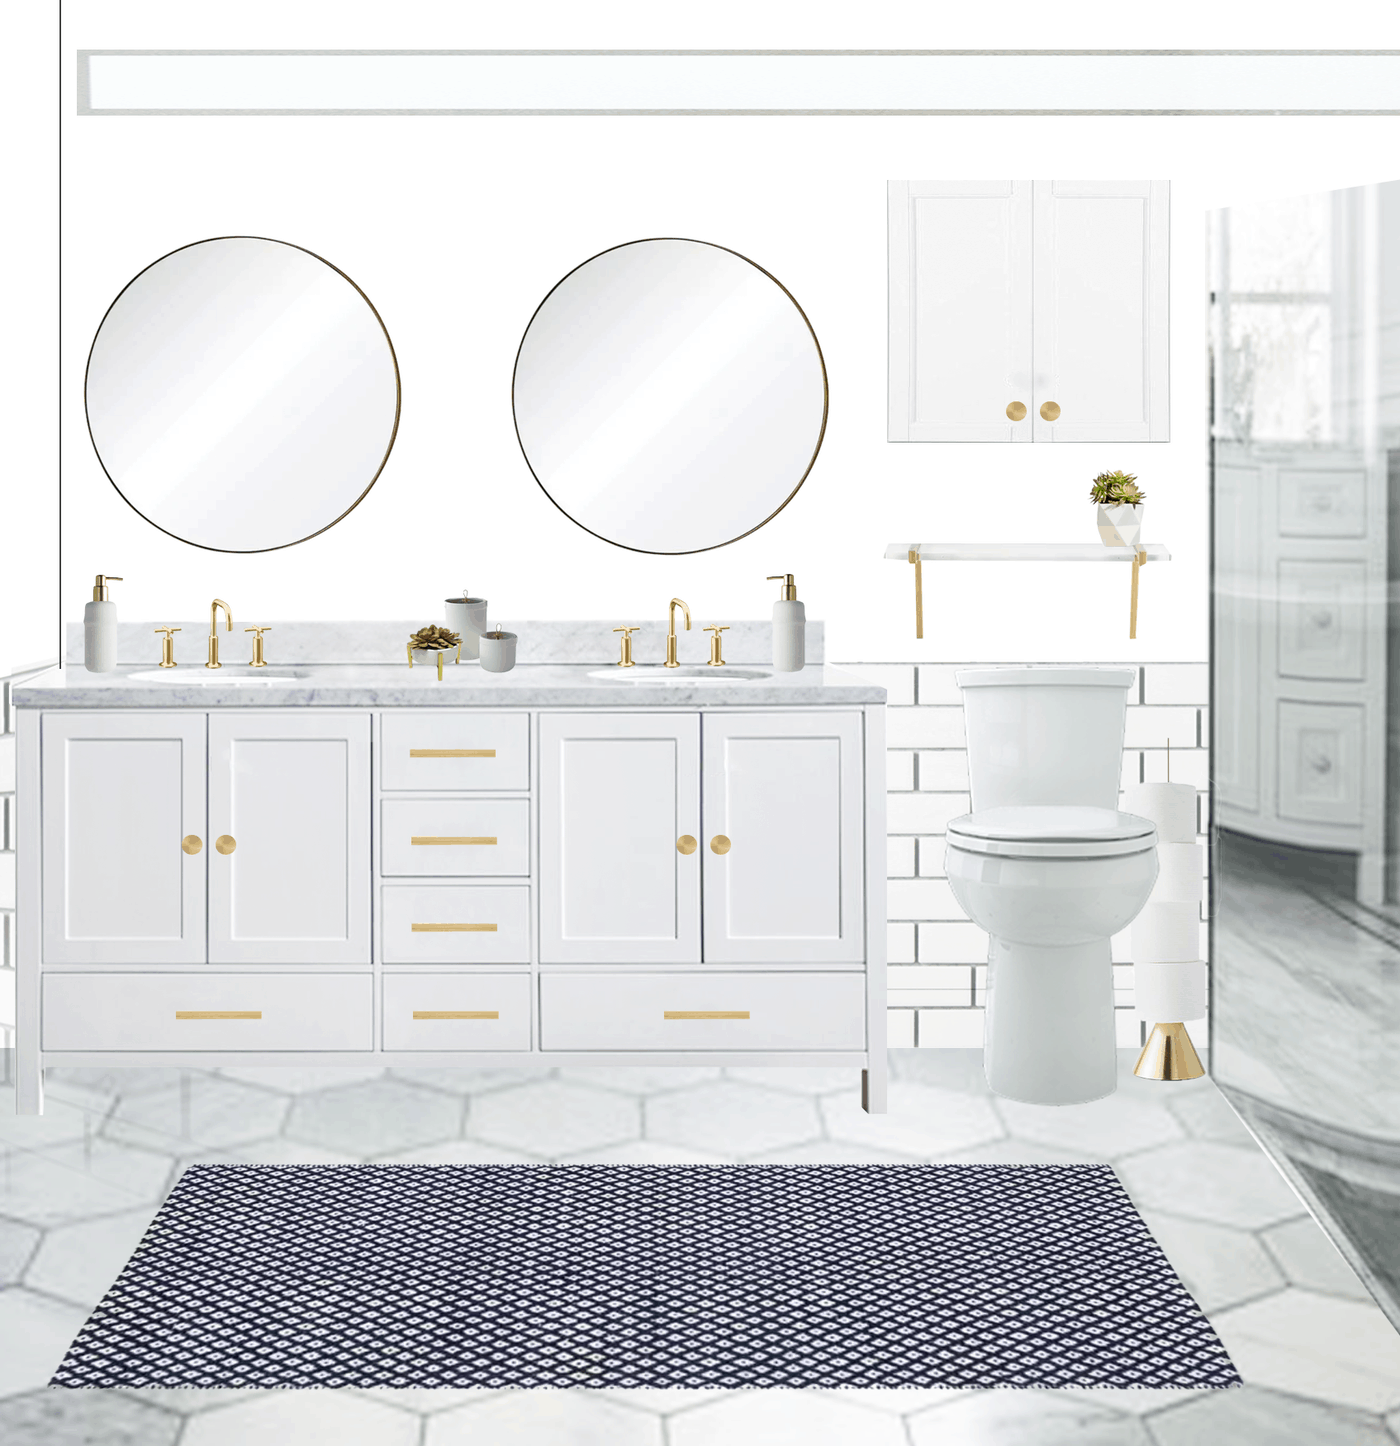 One Room Challenge Week 2: Our Master Bath Design Plan + Help us Pick! by top Houston lifestyle blogger Ashley Rose of Sugar & Cloth